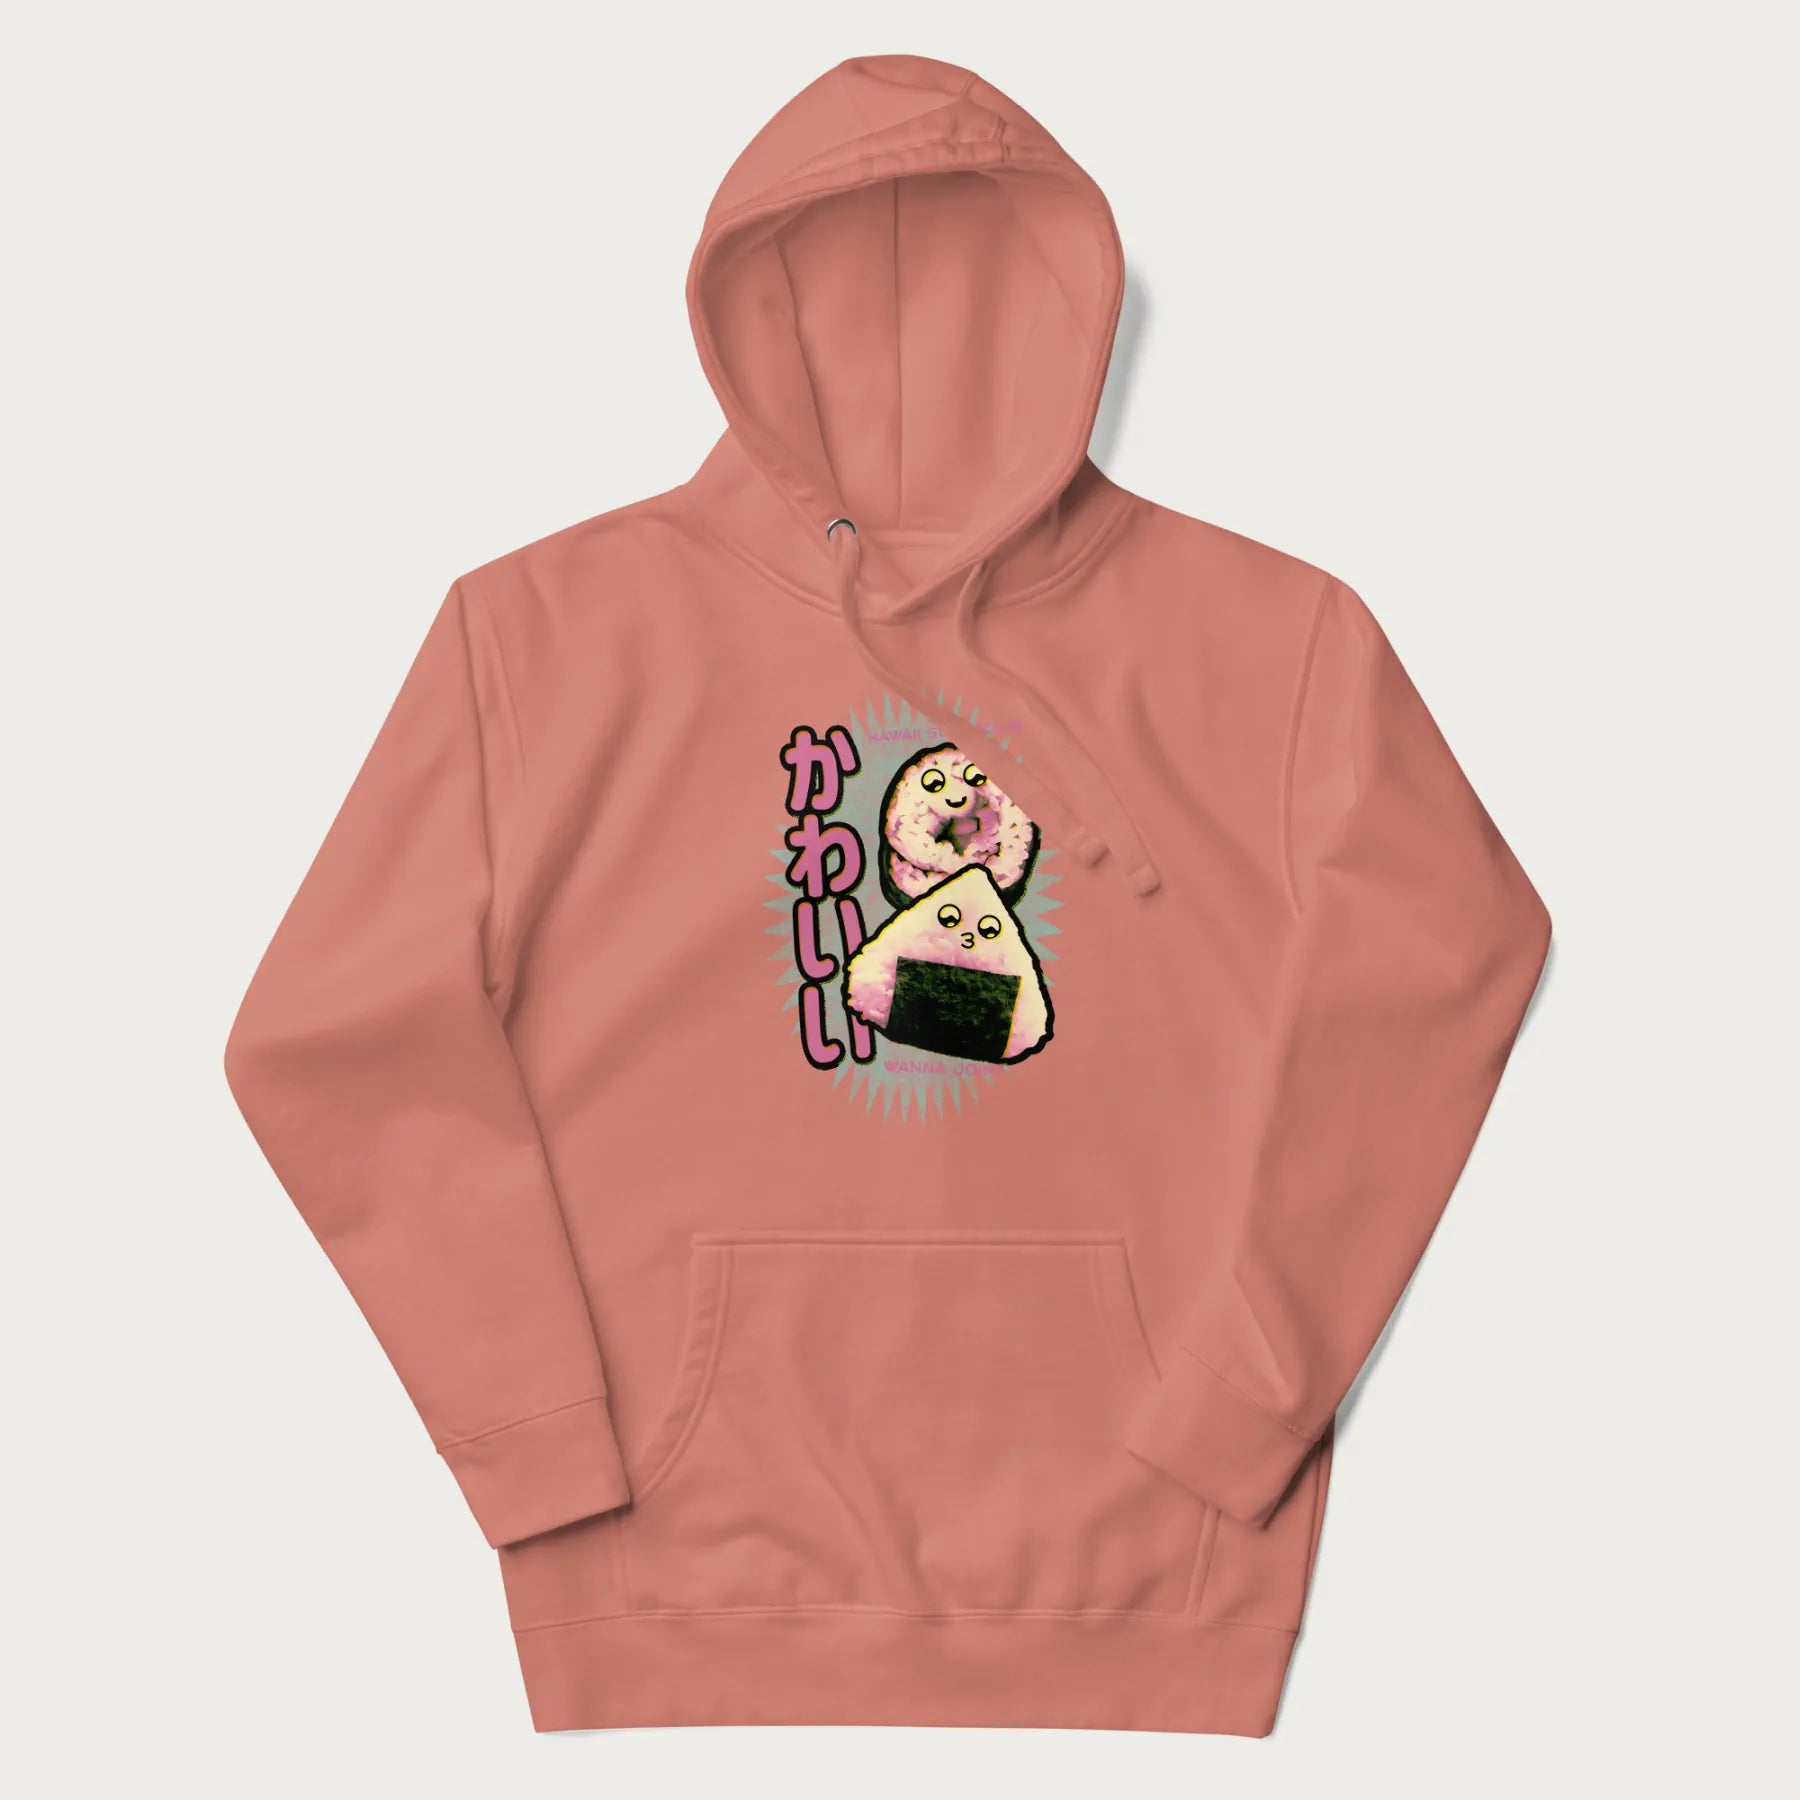 Light pink hoodie featuring a cute sushi and onigiri graphic with the text "Kawaii Sushi Club", colorful neon accents and Japanese characters.